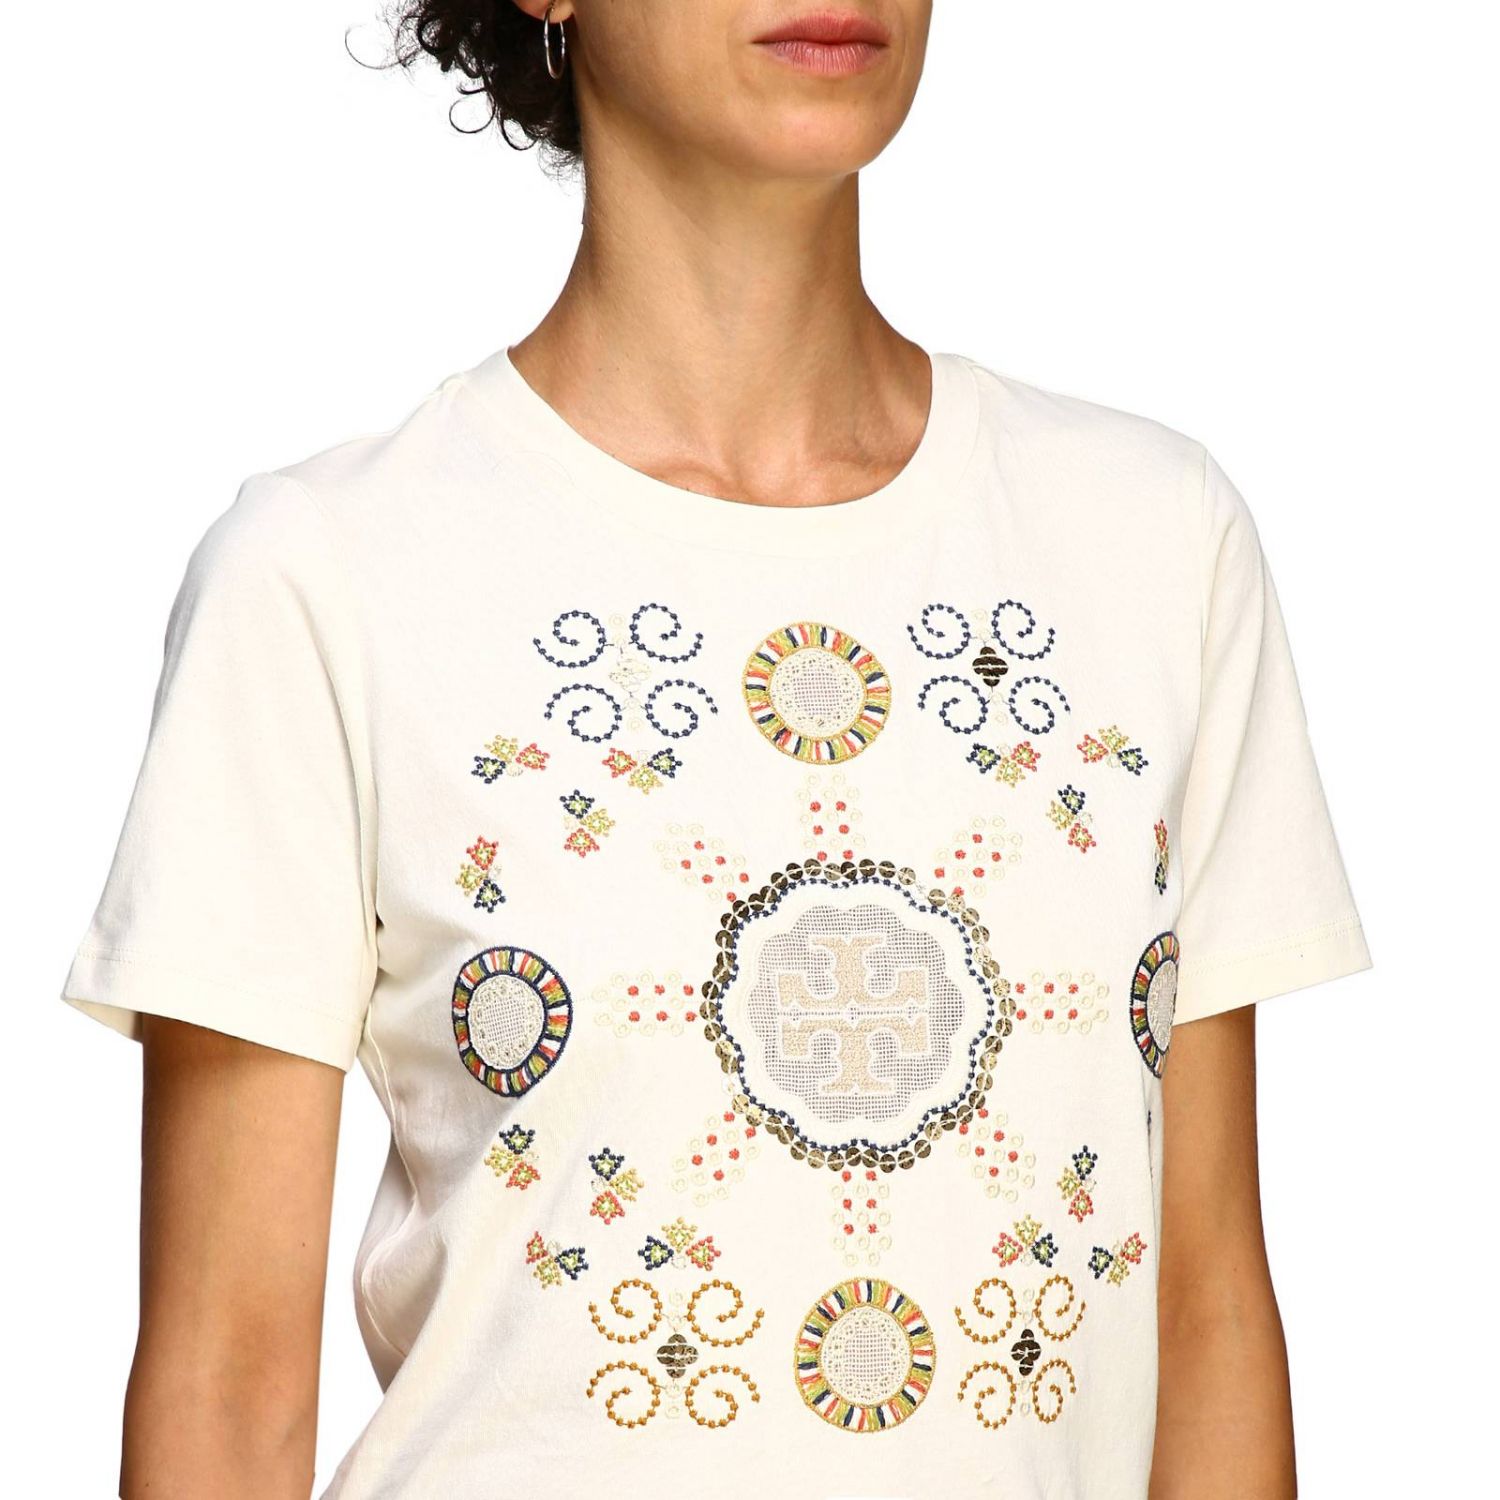 Tory Burch Outlet: t-shirt for woman - White | Tory Burch t-shirt 56528  online on 